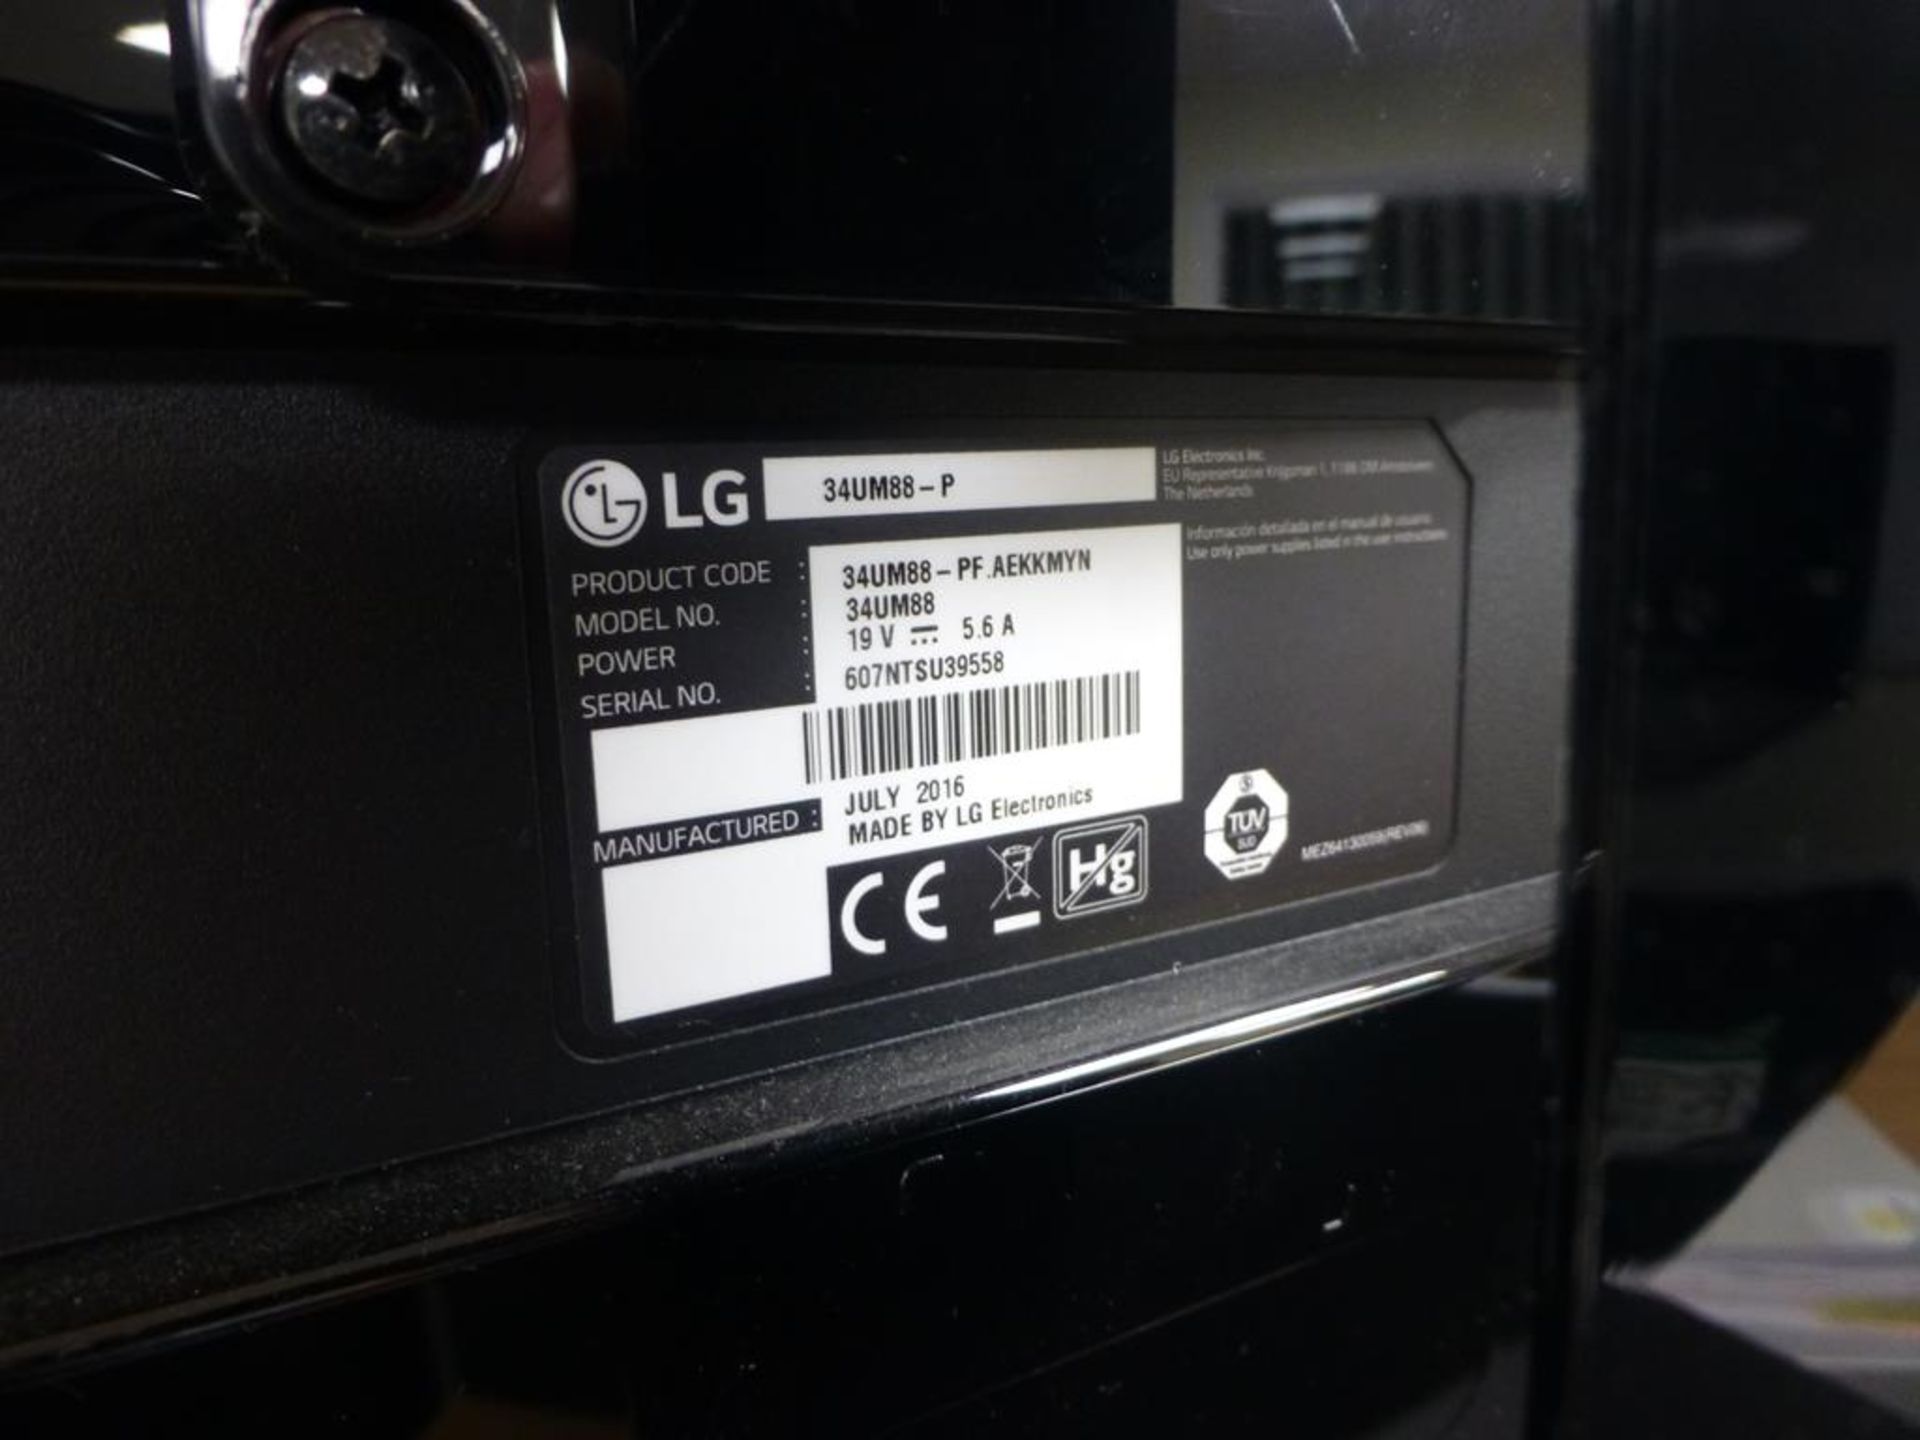 LG 34UM88-P widescreen LCD display - Image 2 of 2